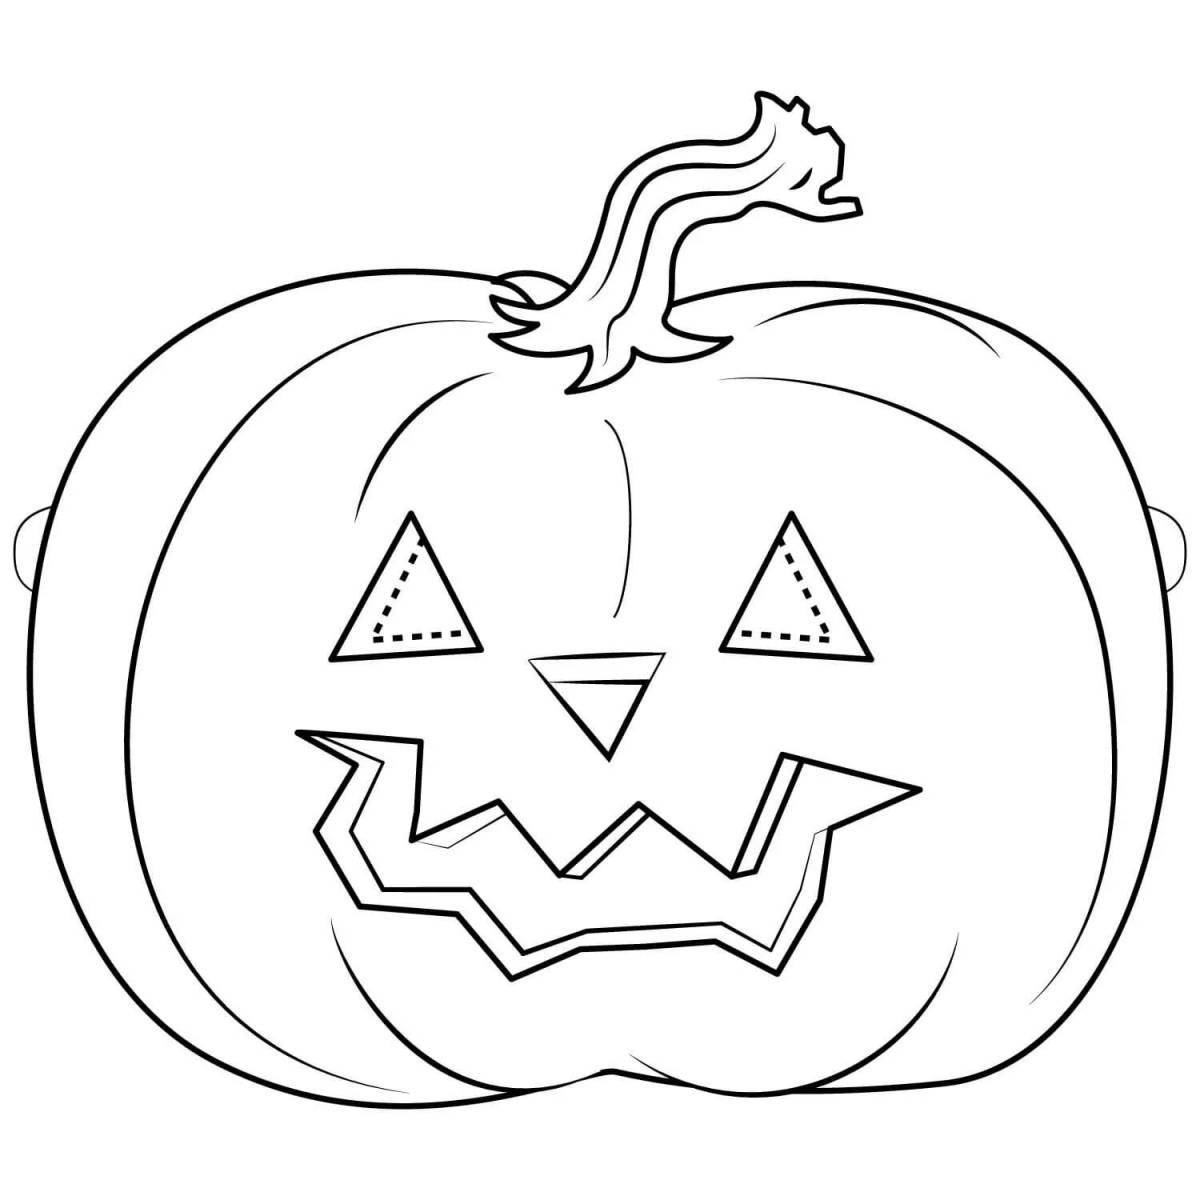 Halloween pumpkin coloring page that makes your hair stand on end